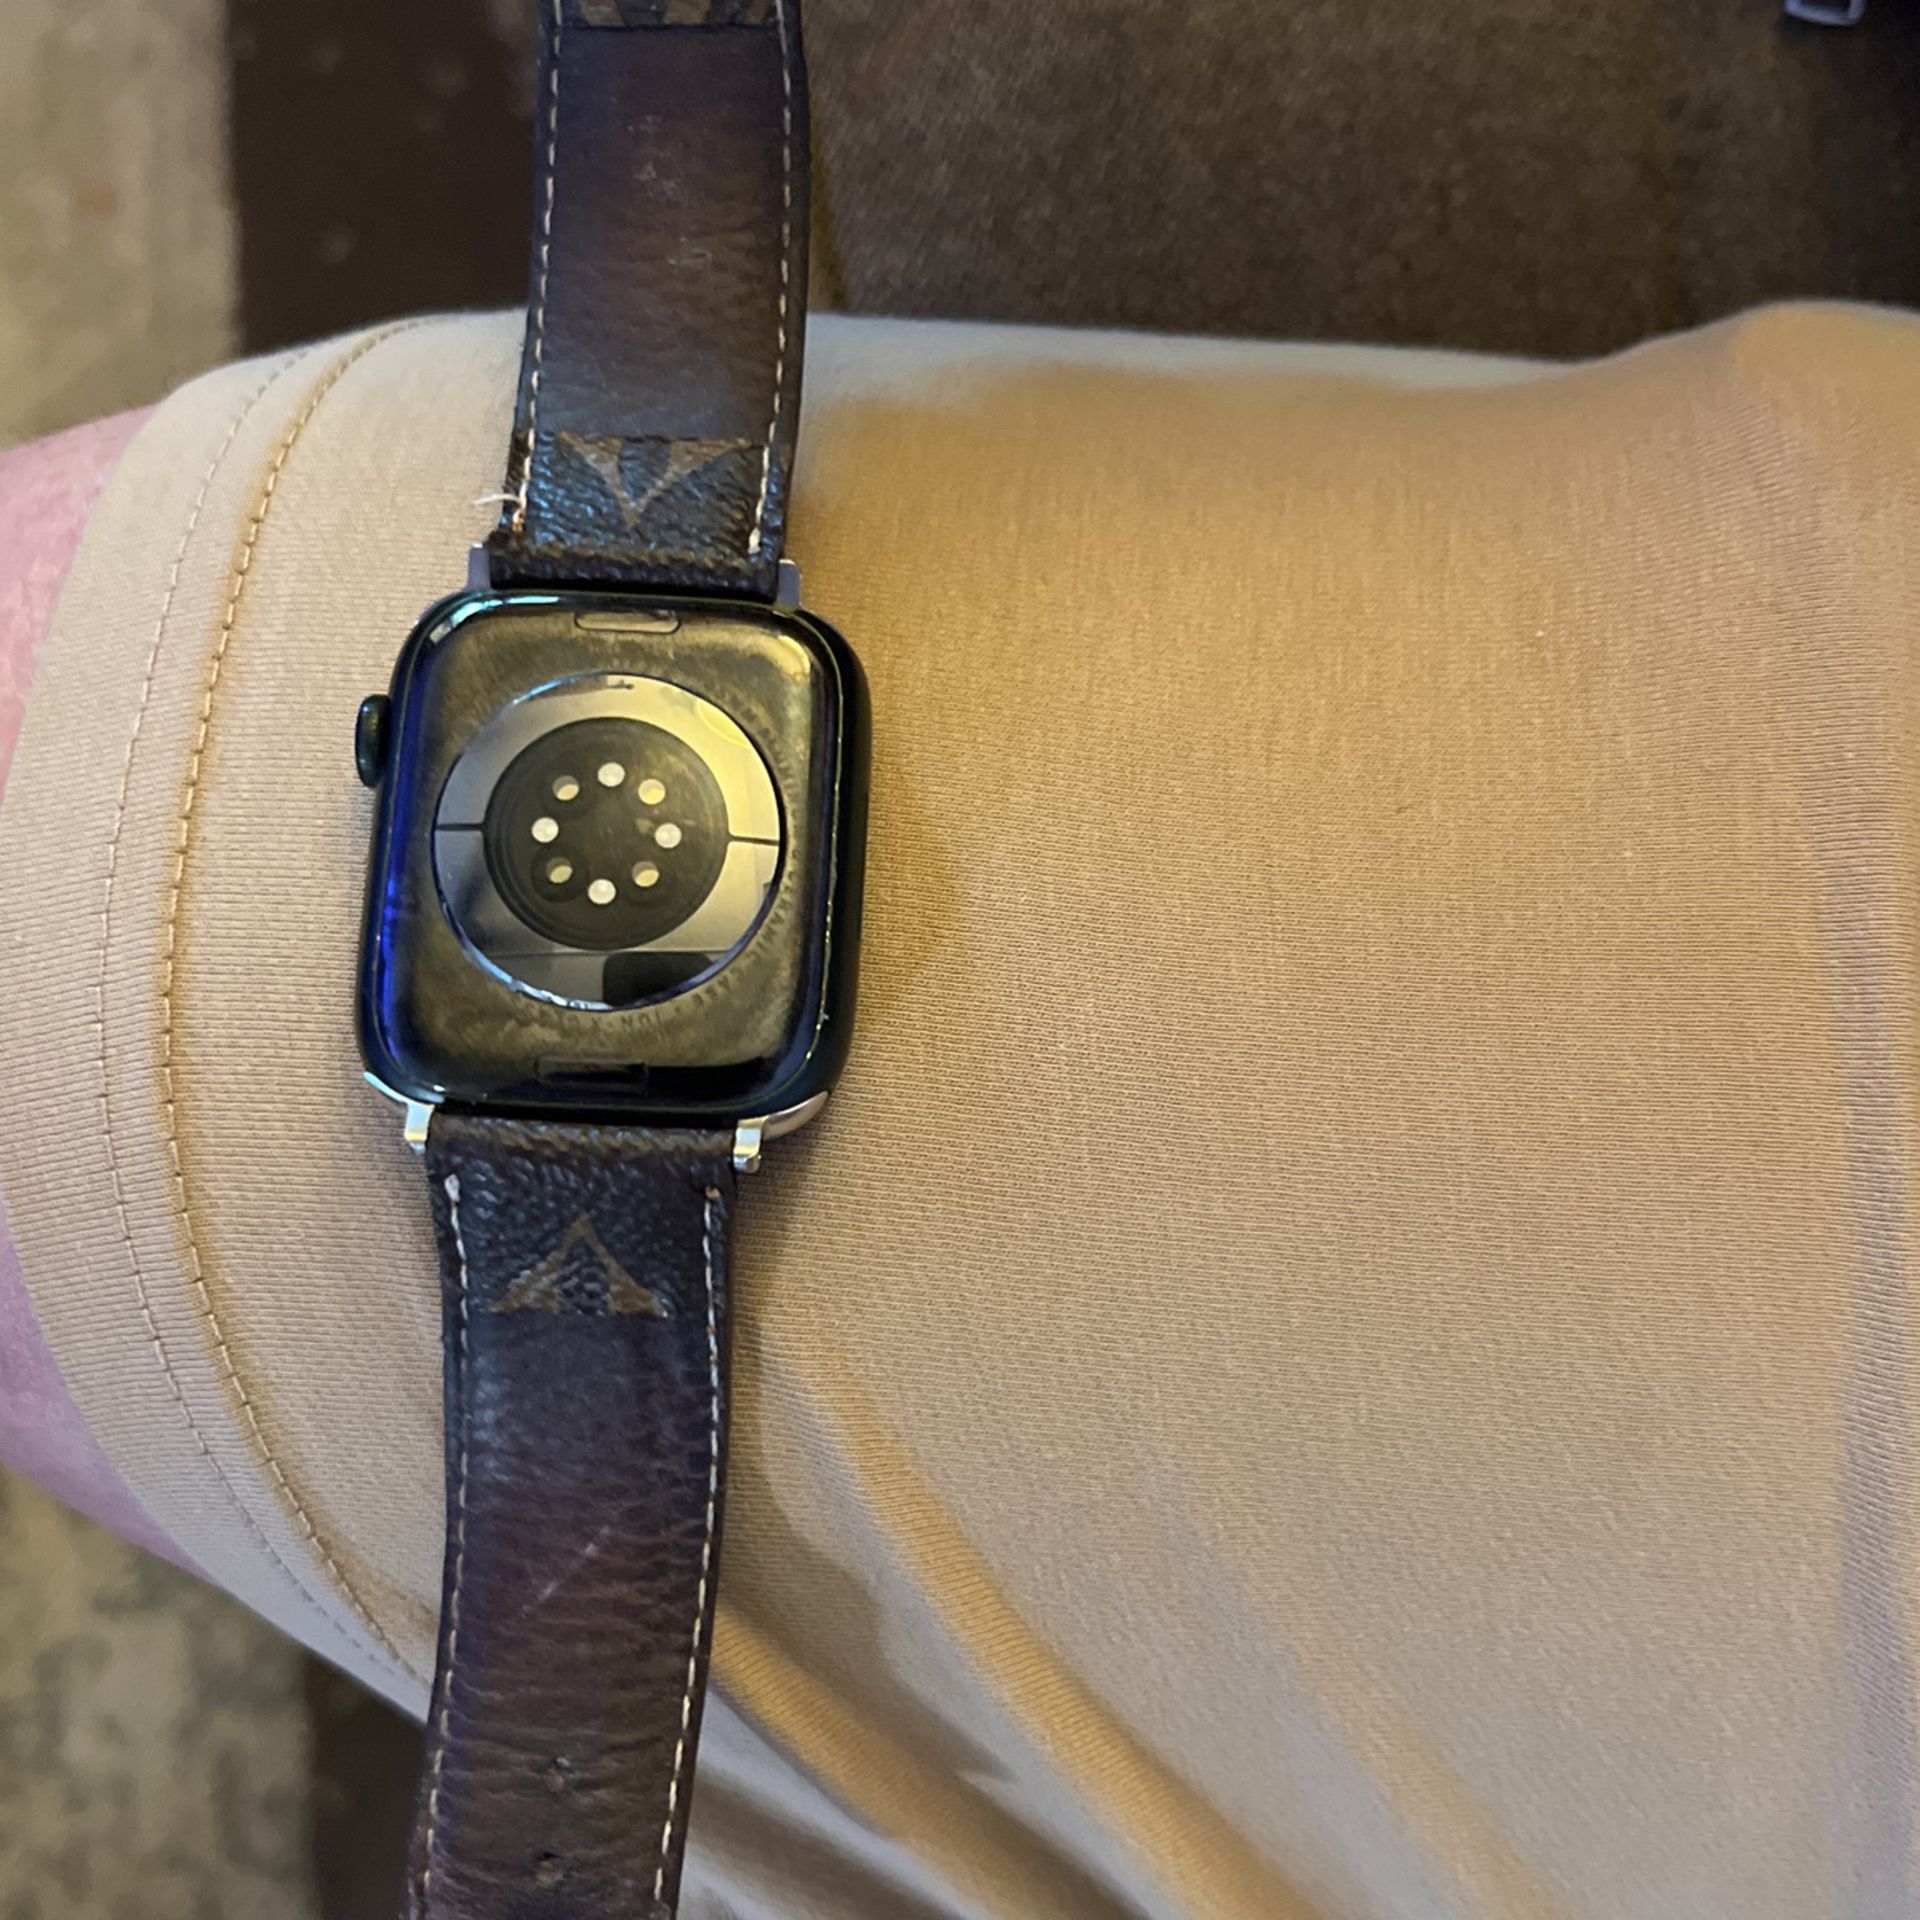 Apple watch 3 w/authentic Louis Vuitton band for Sale in Poway, CA